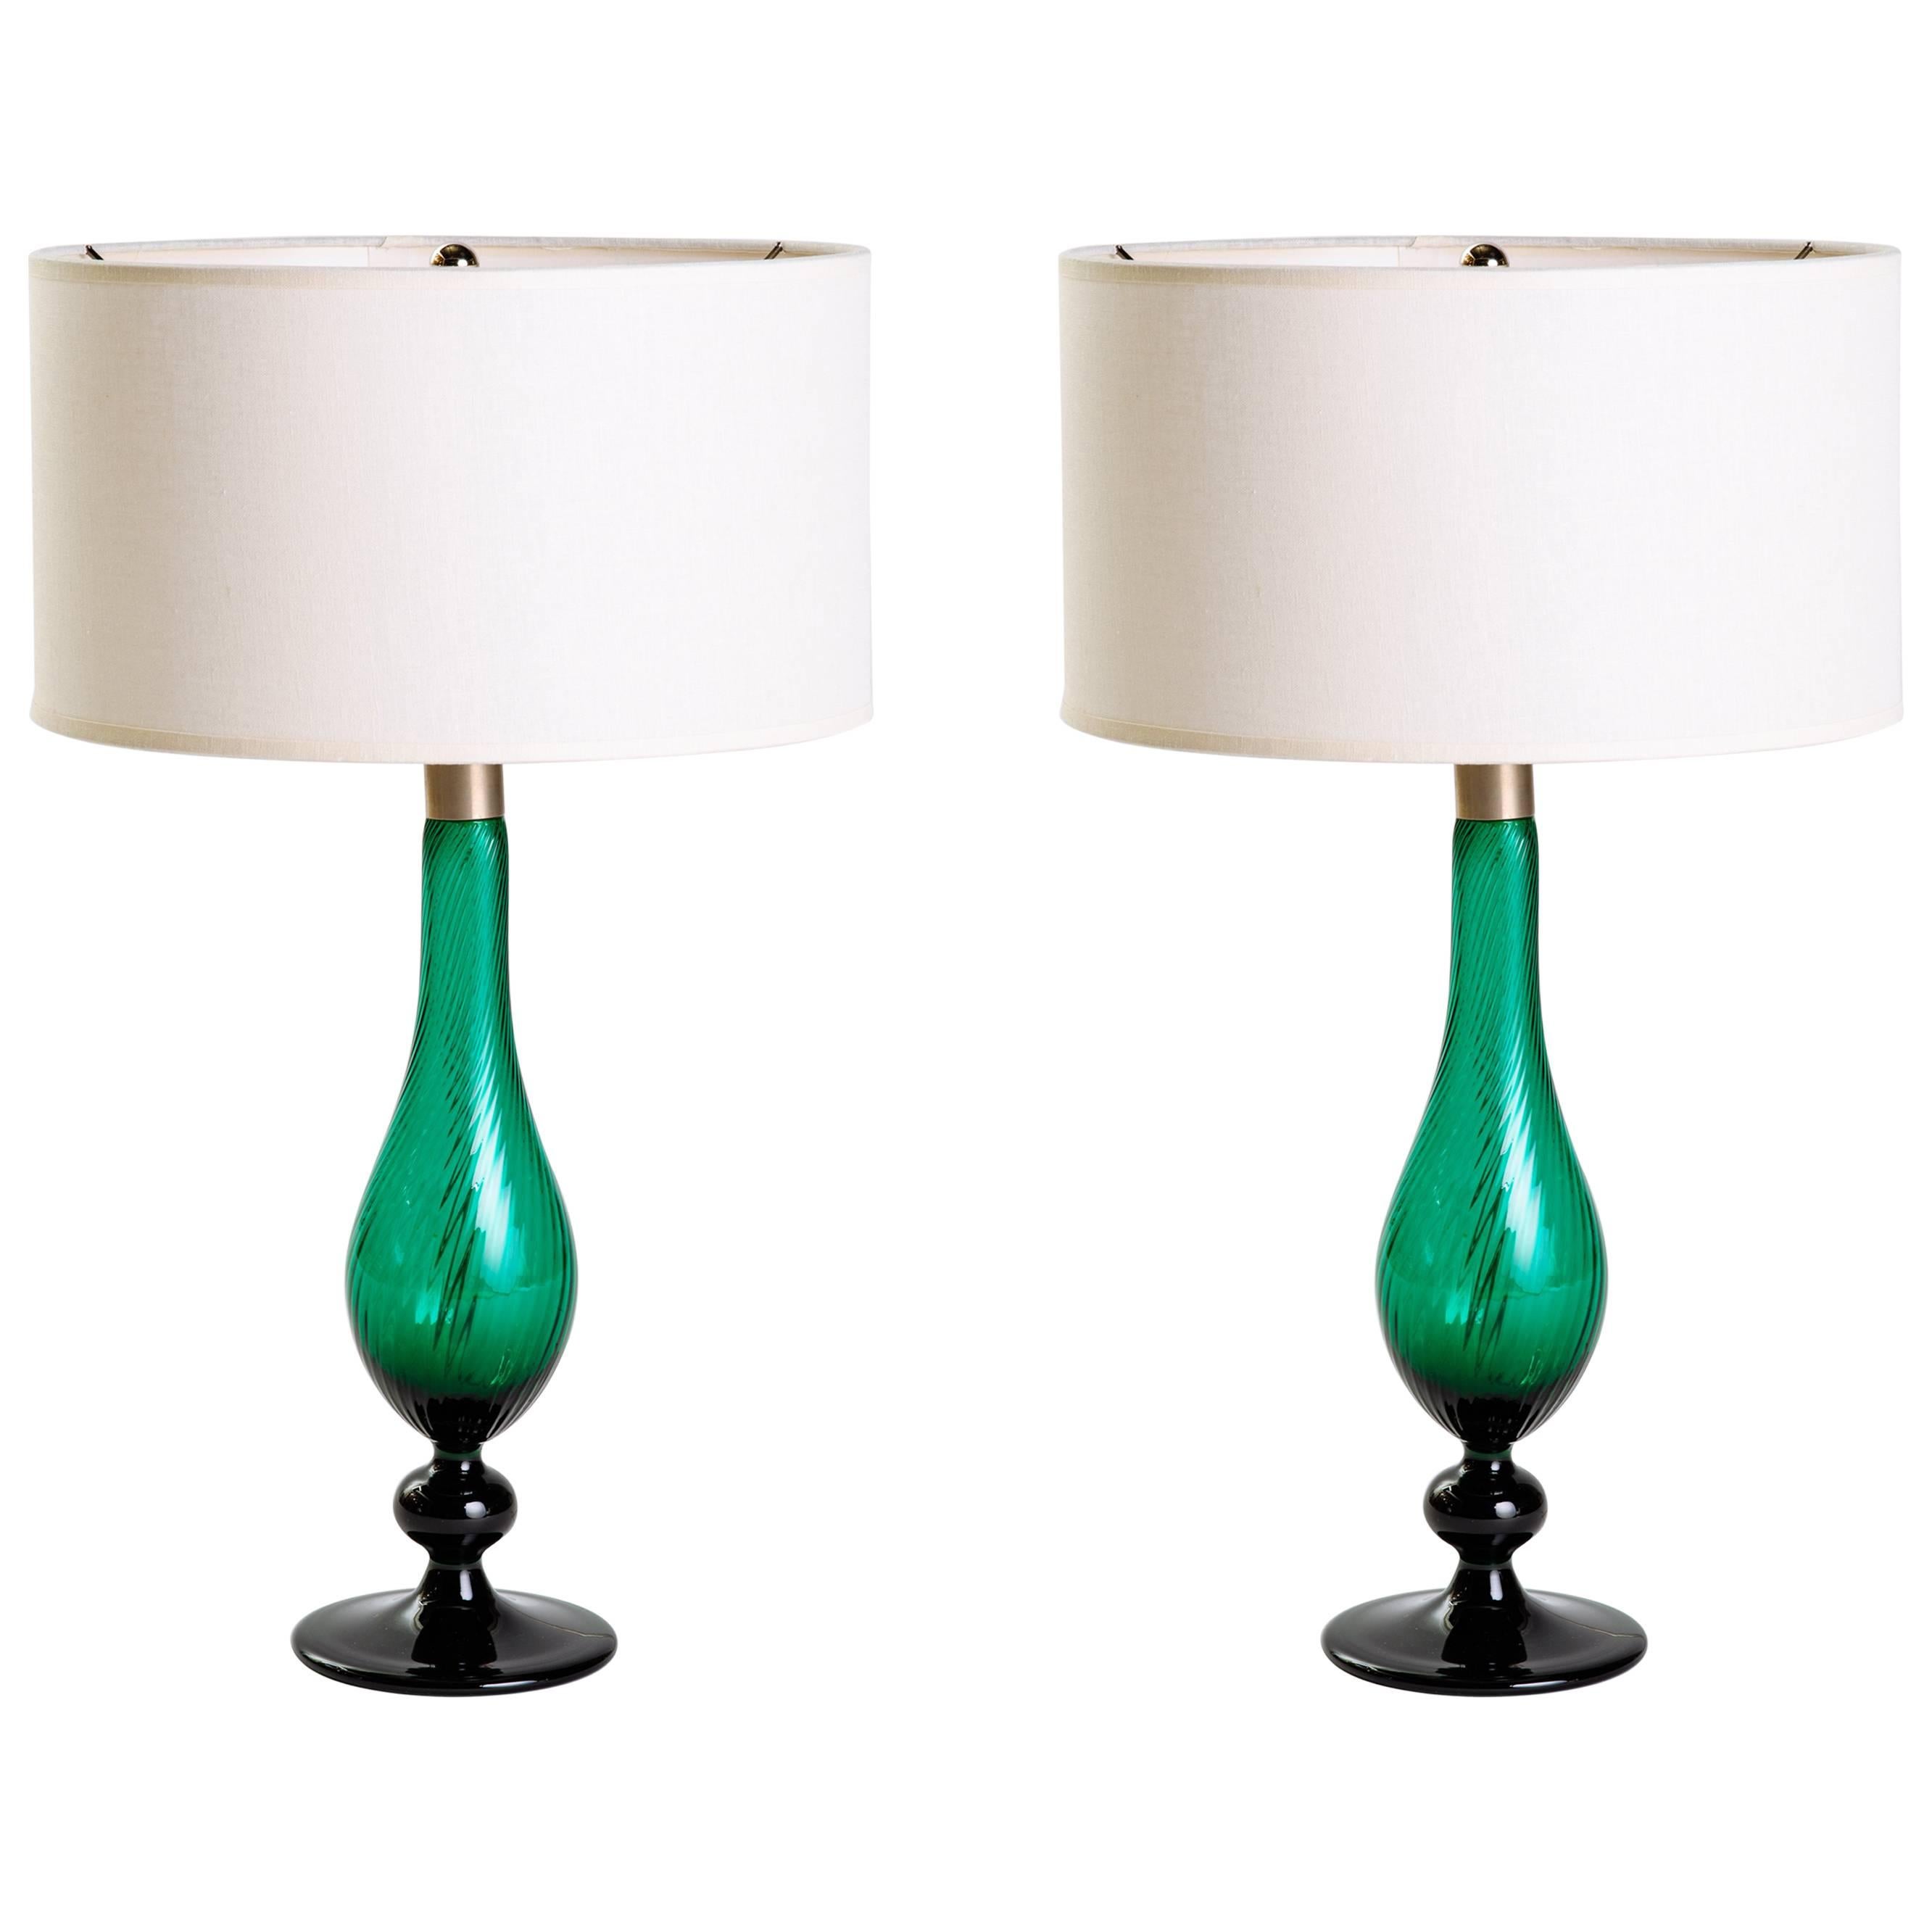 Pair of Mid-Century Modern Glass Lamps in Emerald Green by Royal Copenhagen